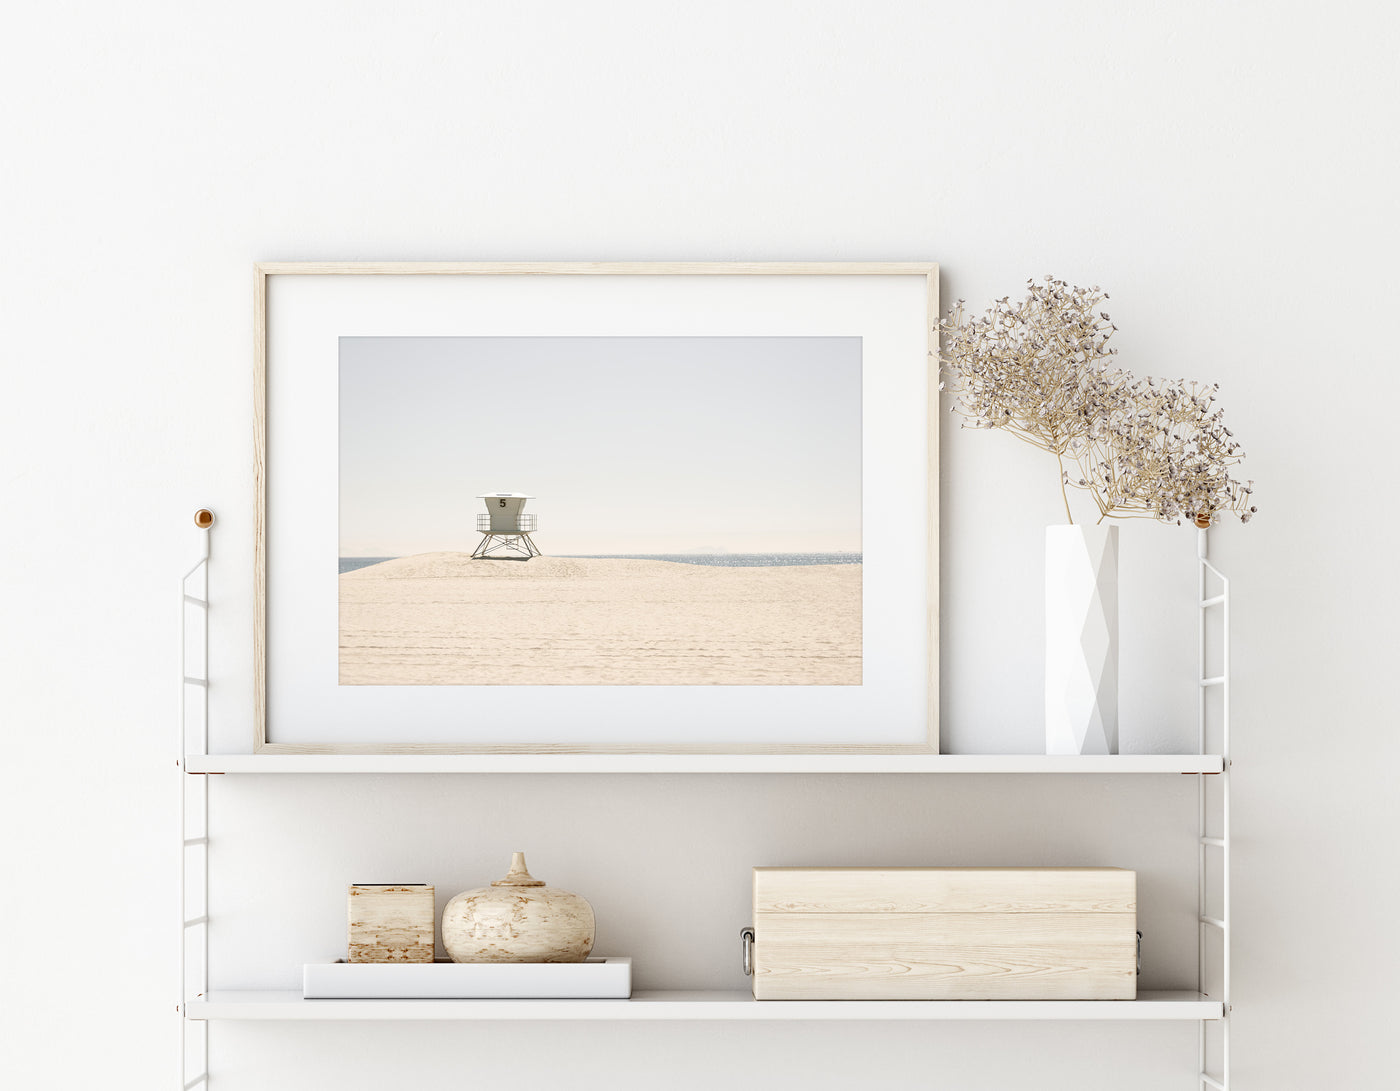 California Dreaming No 1 - Framed beach fine art print by Cattie Coyle Photography on string shelf with neutral colored decor items